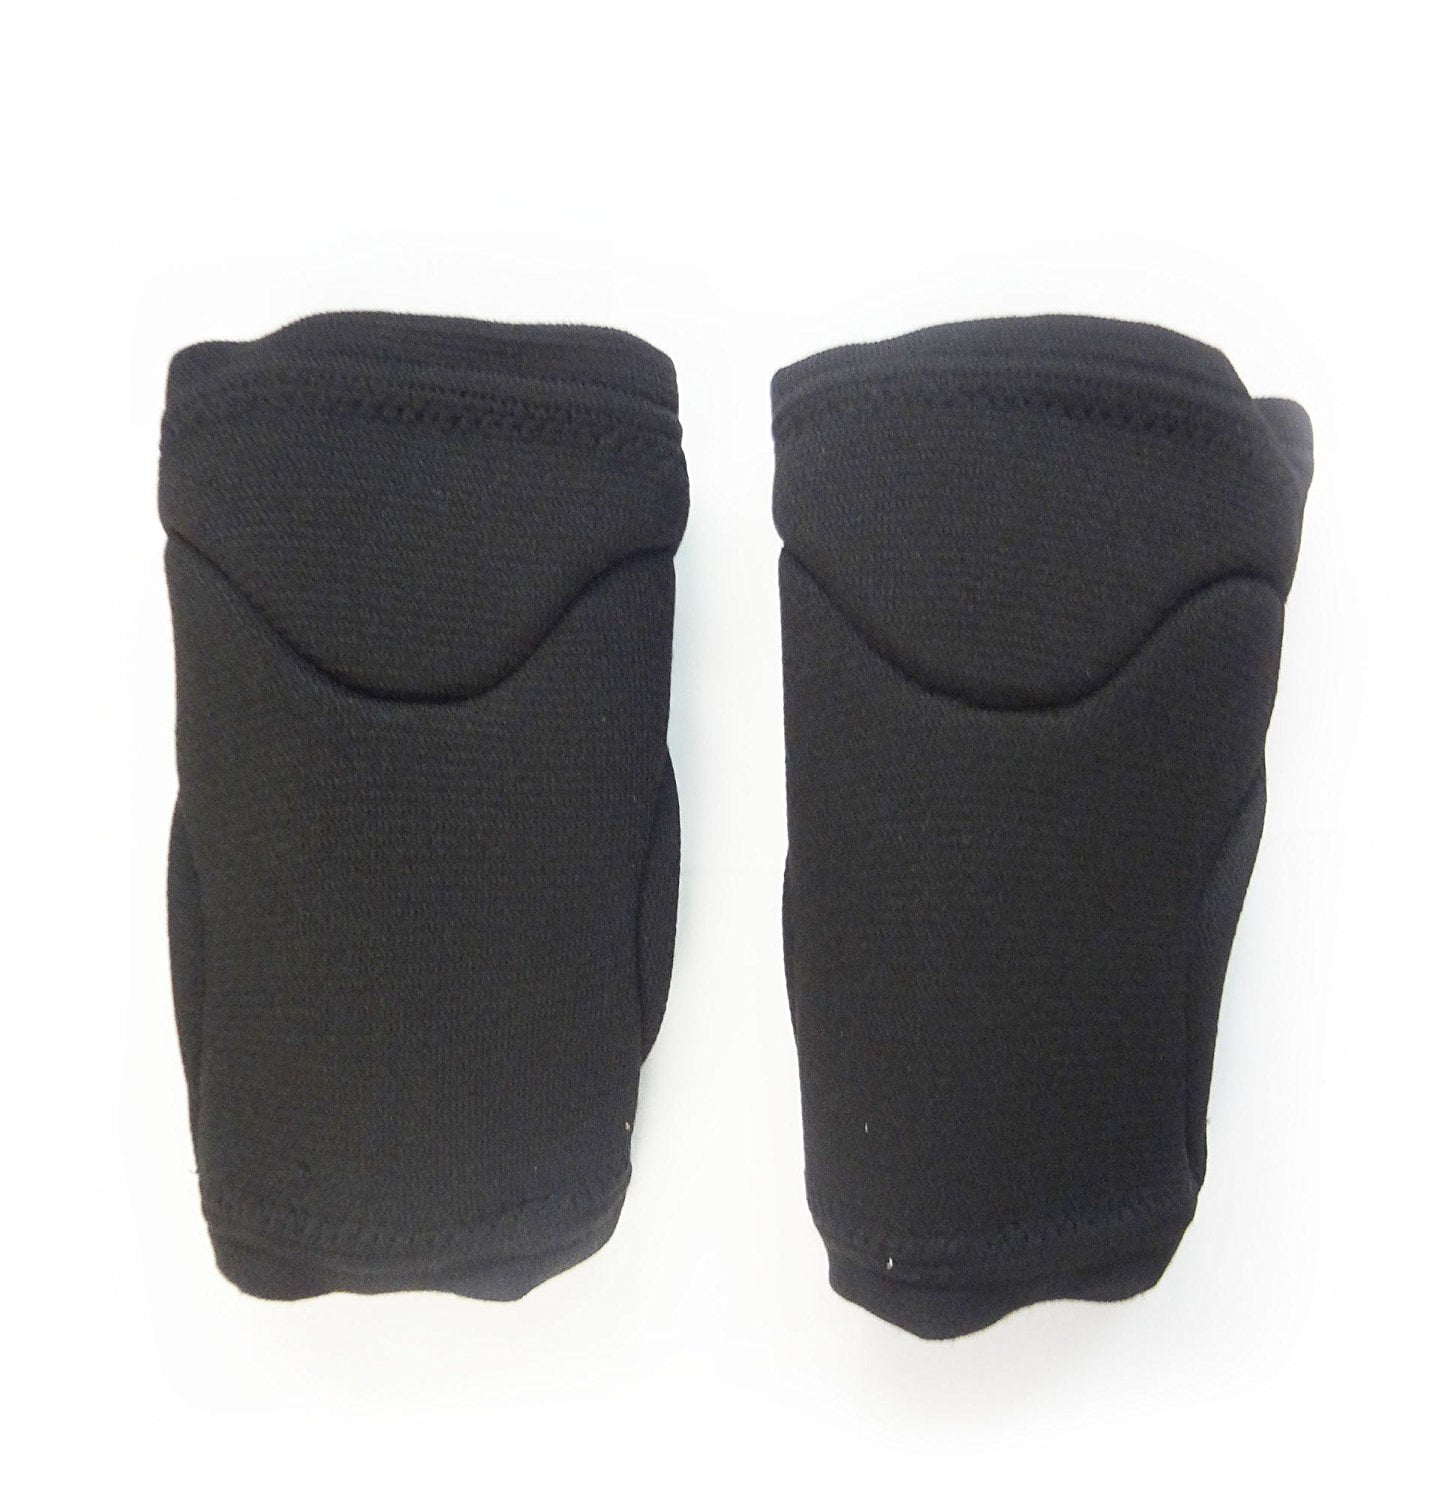 ACE 3M Elbow Pads Black One Size Sport Volleyball Shock Absorbing Support 908002 